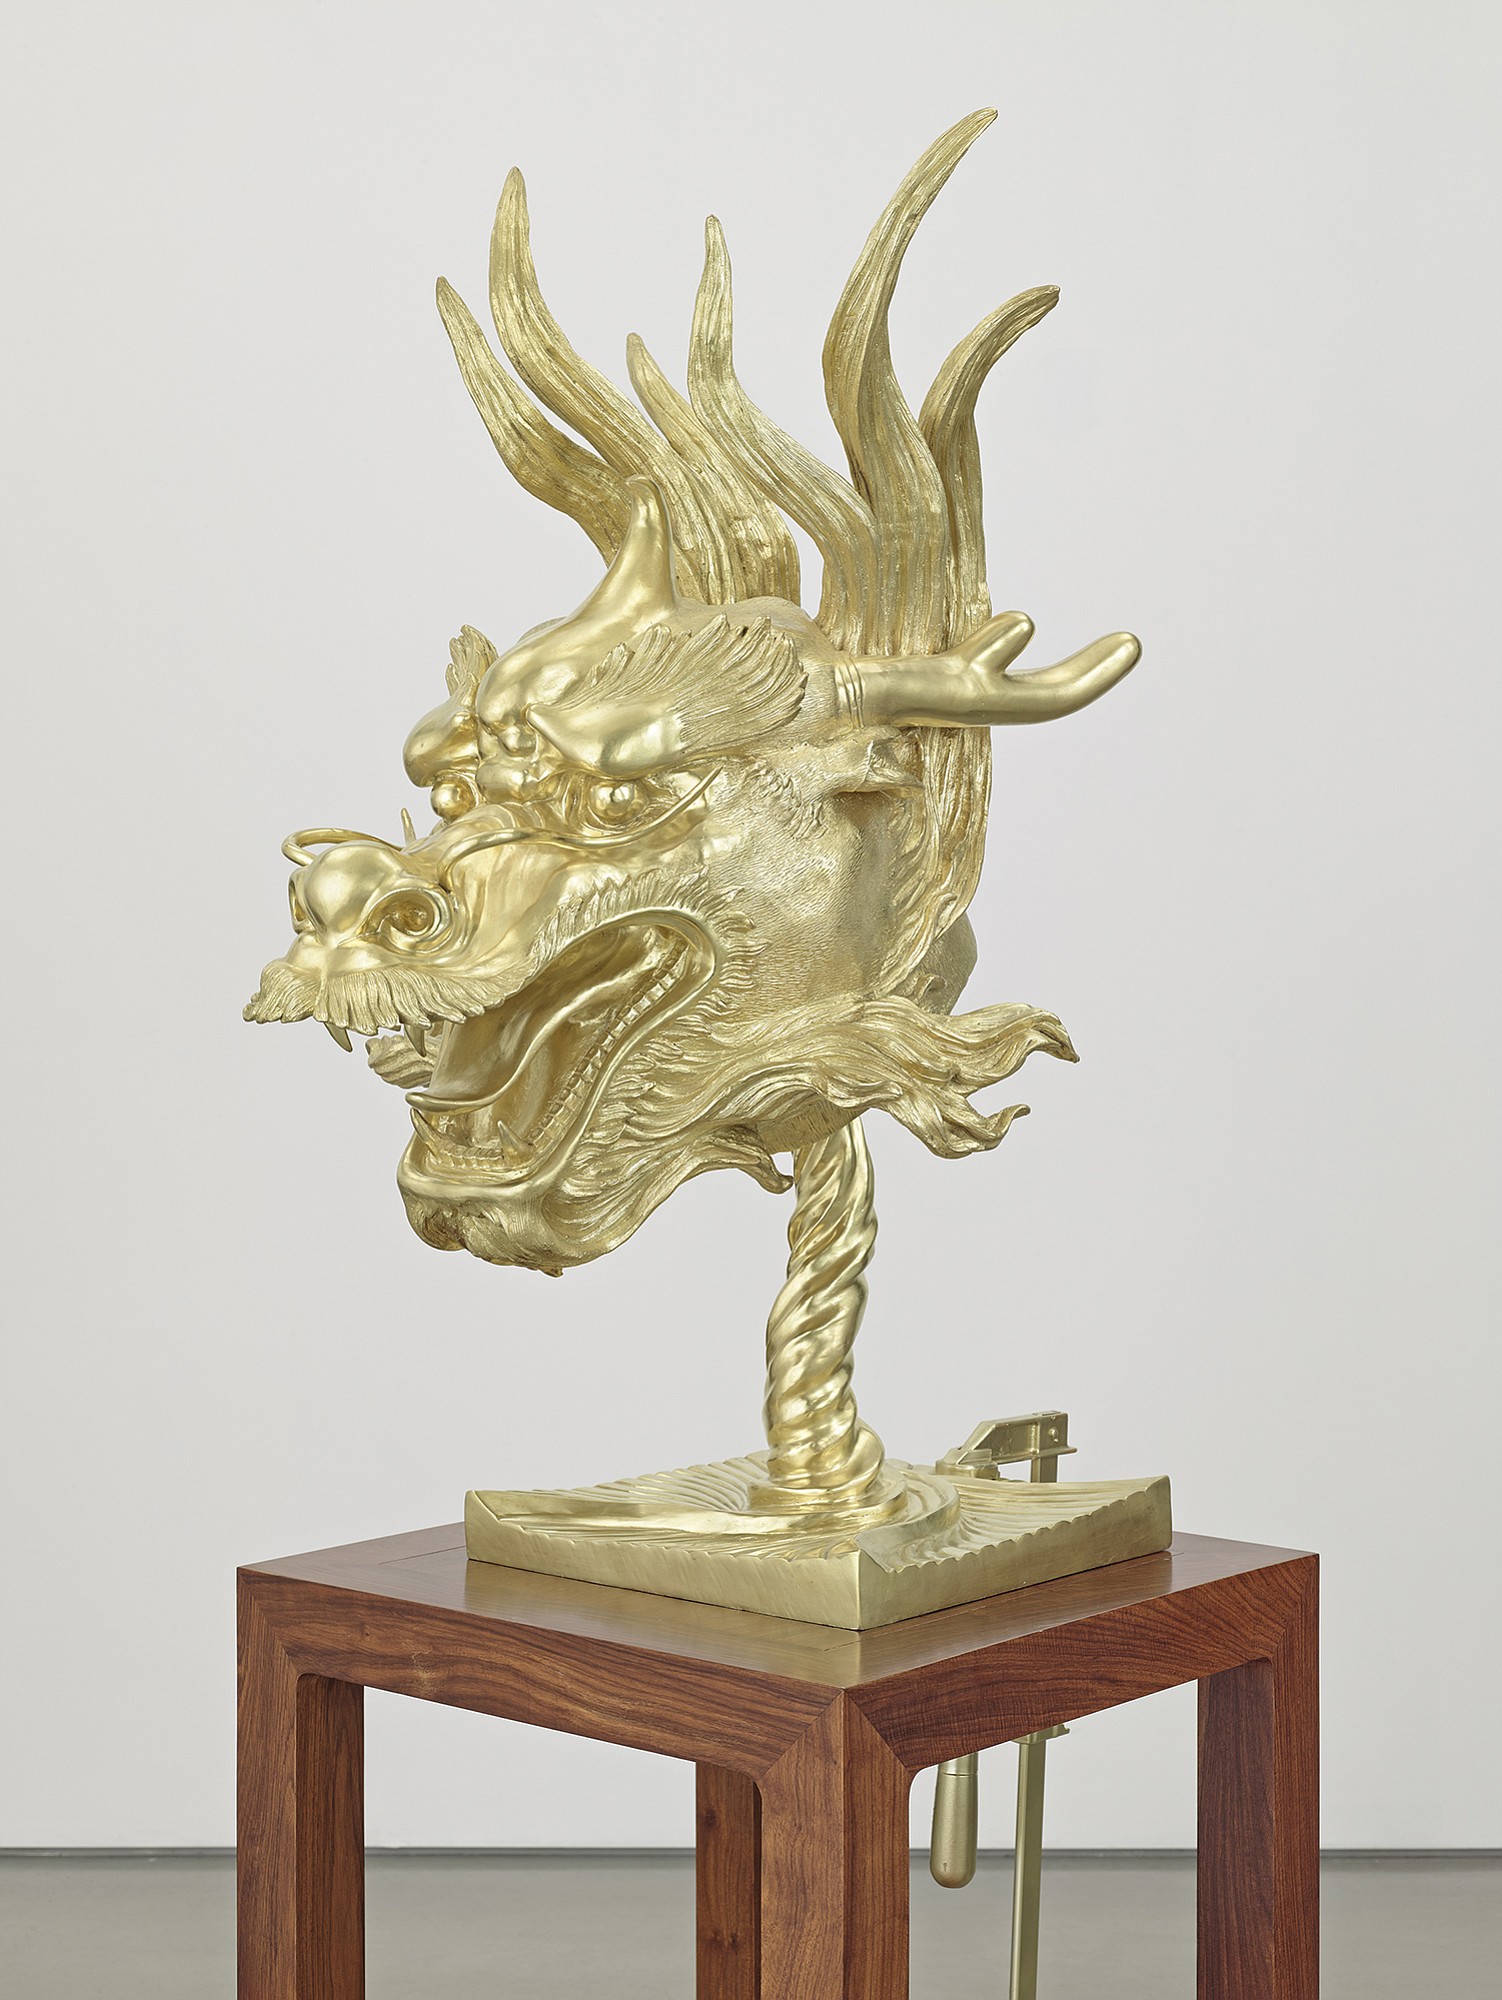 &quot;Circle of Animals/Zodiac Heads: Gold,&quot; by contemporary Chinese artist Ai Weiwei will be on display May 23 through Sept.